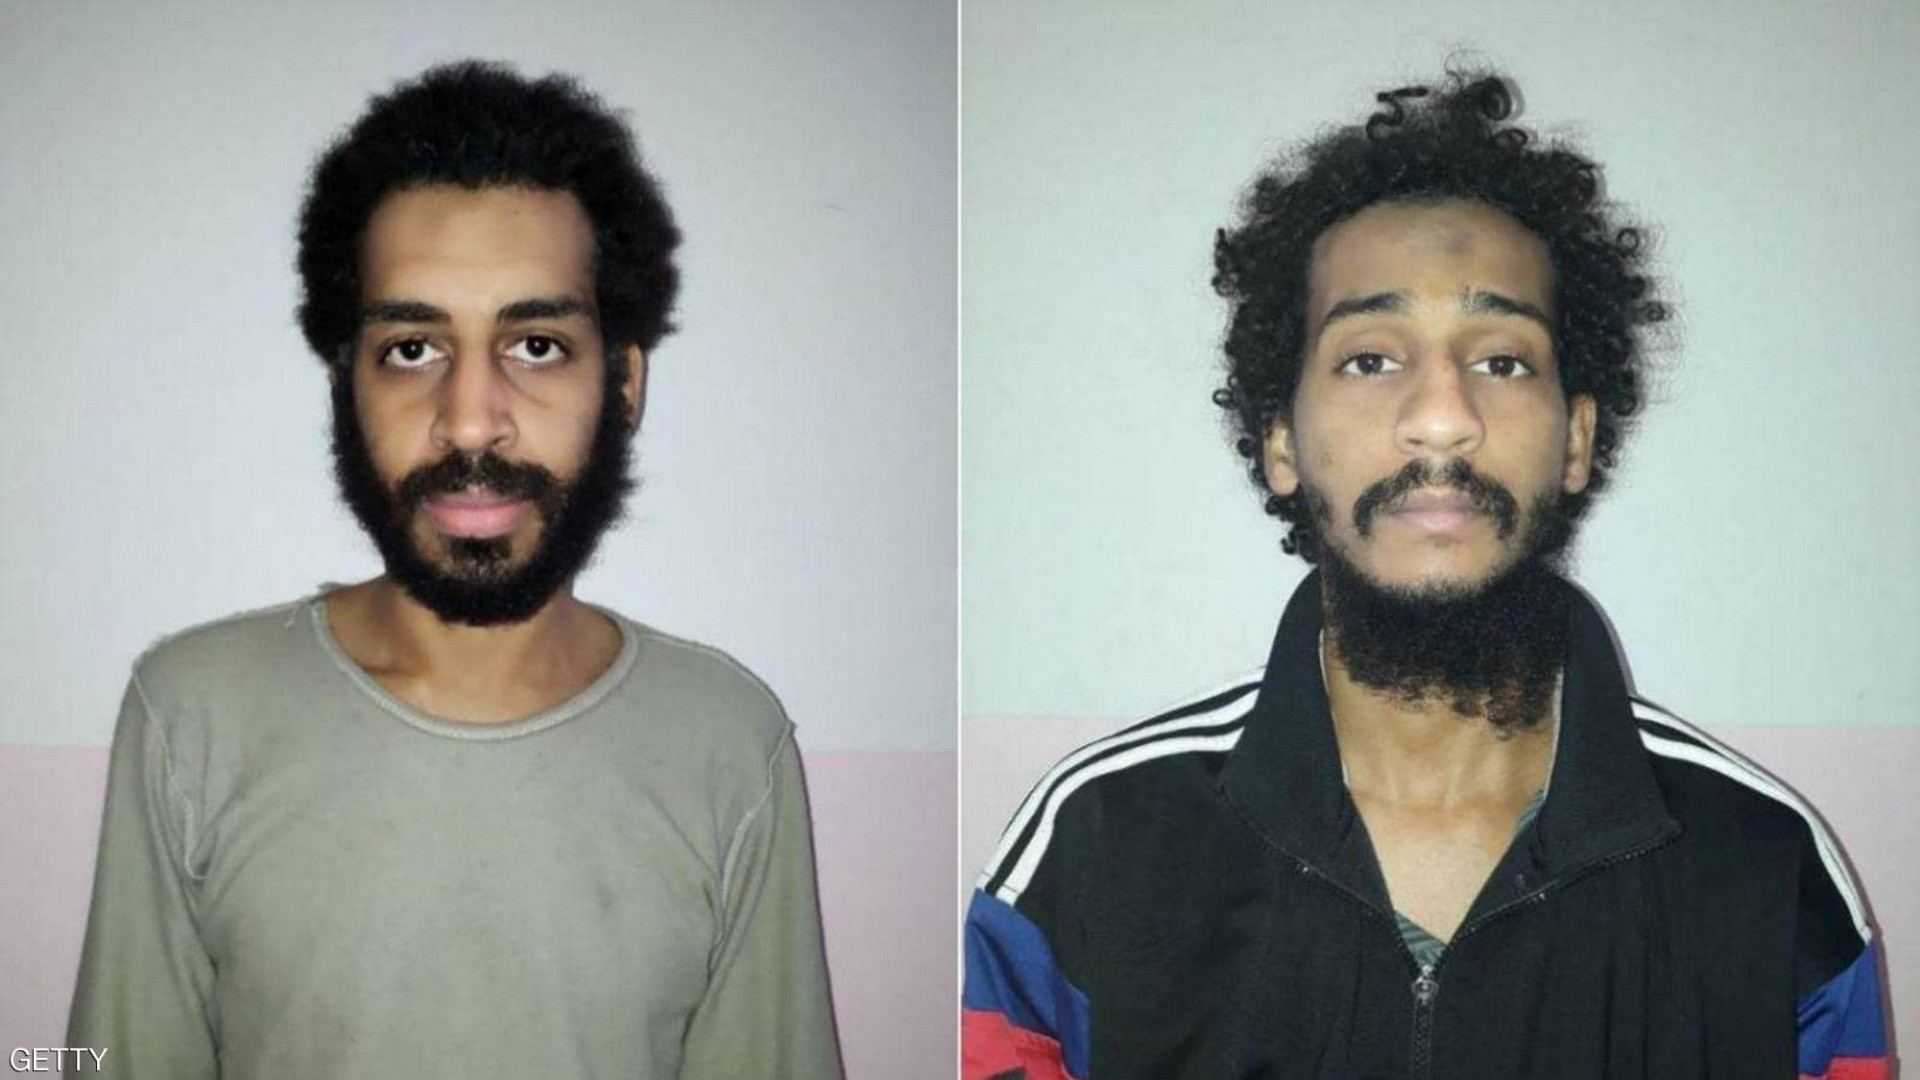 Alleged Islamic State “Beatles” headed to U.S. on charges of hostage deaths